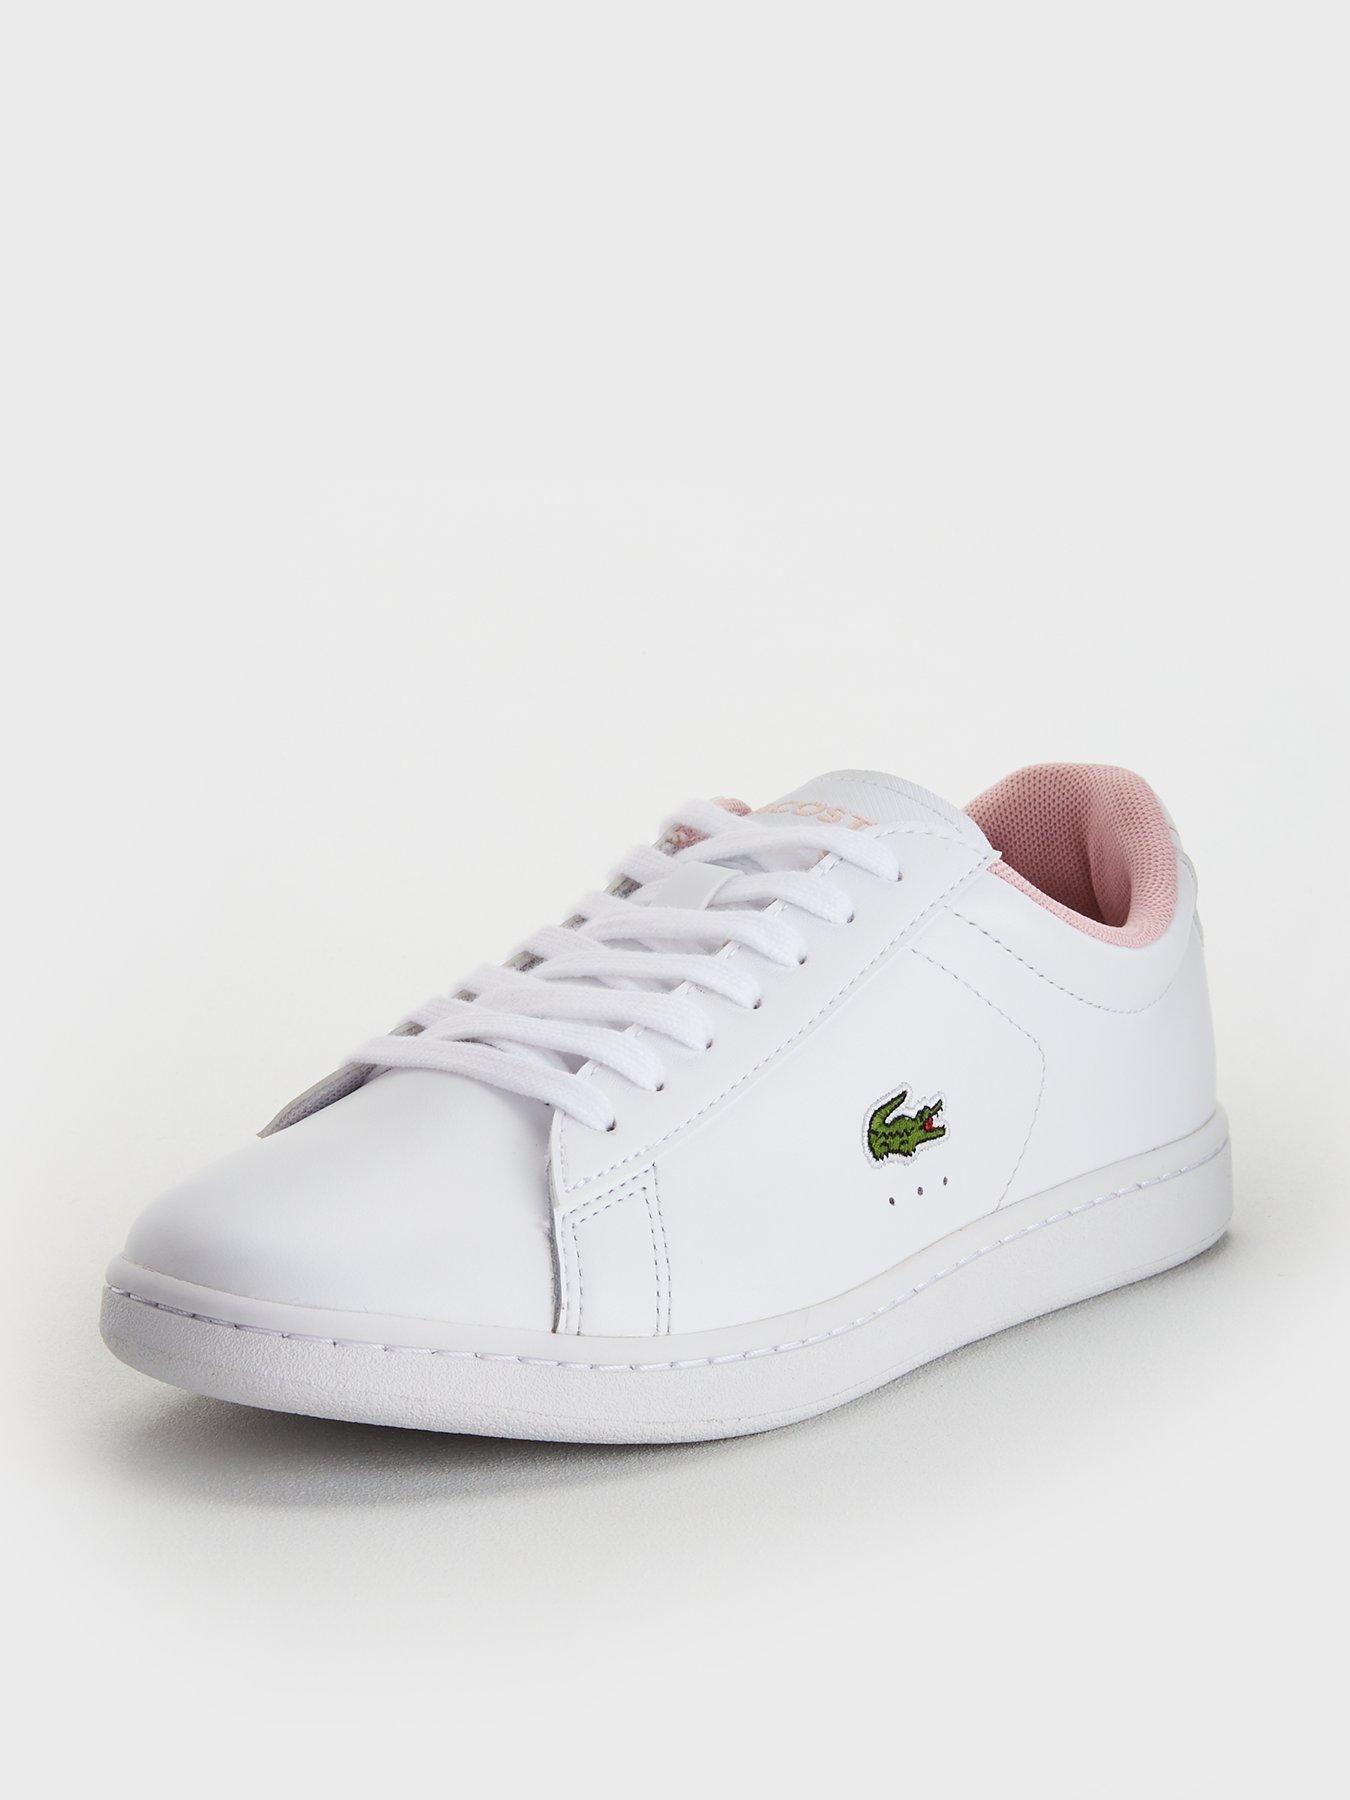 Womens Lacoste Trainers | Lacoste Shoes 